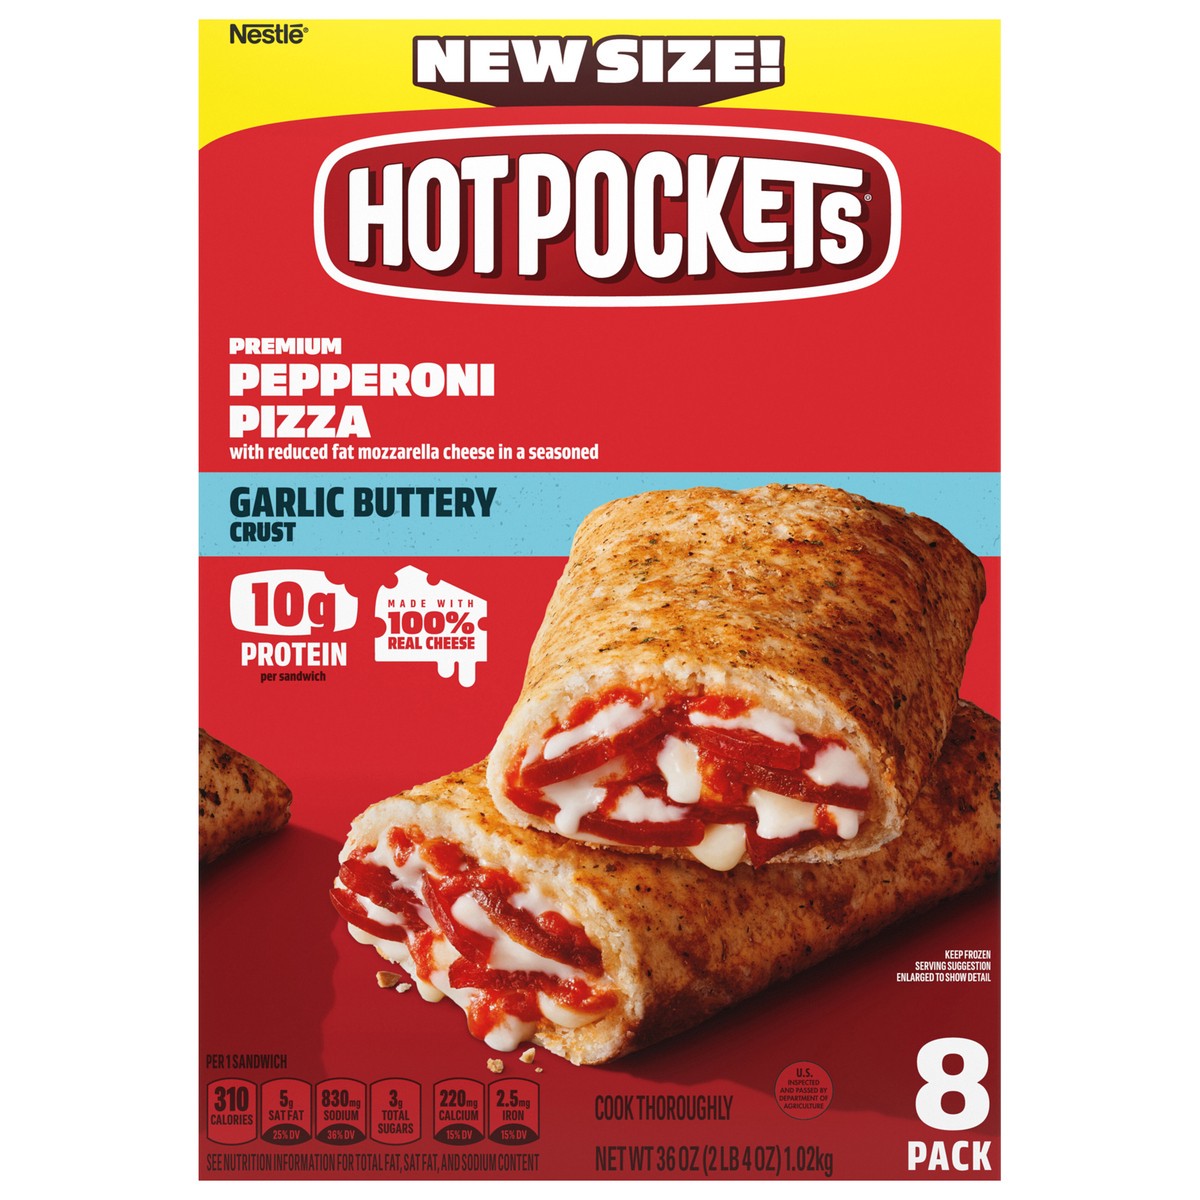 slide 1 of 9, Hot Pockets Pepperoni Pizza Frozen Snacks in a Garlic Buttery Crust, Pizza Snacks Made with Mozzarella Cheese, Frozen Sandwiches, 2.25 lb